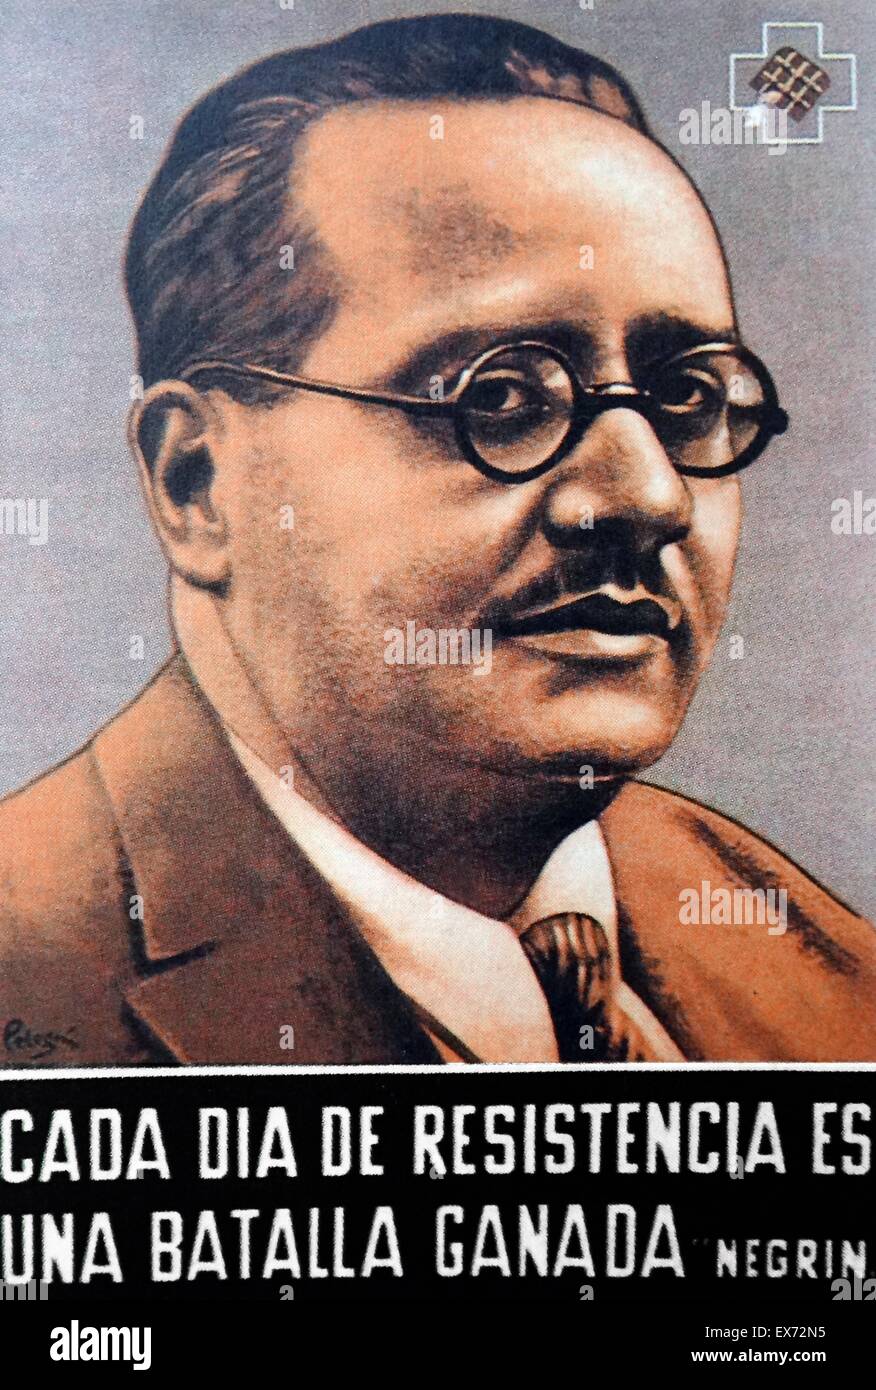 Juan Negrín y López (1892 – 1956) Spanish politician and physician. He was a leader of the Spanish Socialist Workers' Party (PSOE) and served as finance minister. He was the last Loyalist premier of Spain (1937–39), and presided over the defeat of the Rep Stock Photo